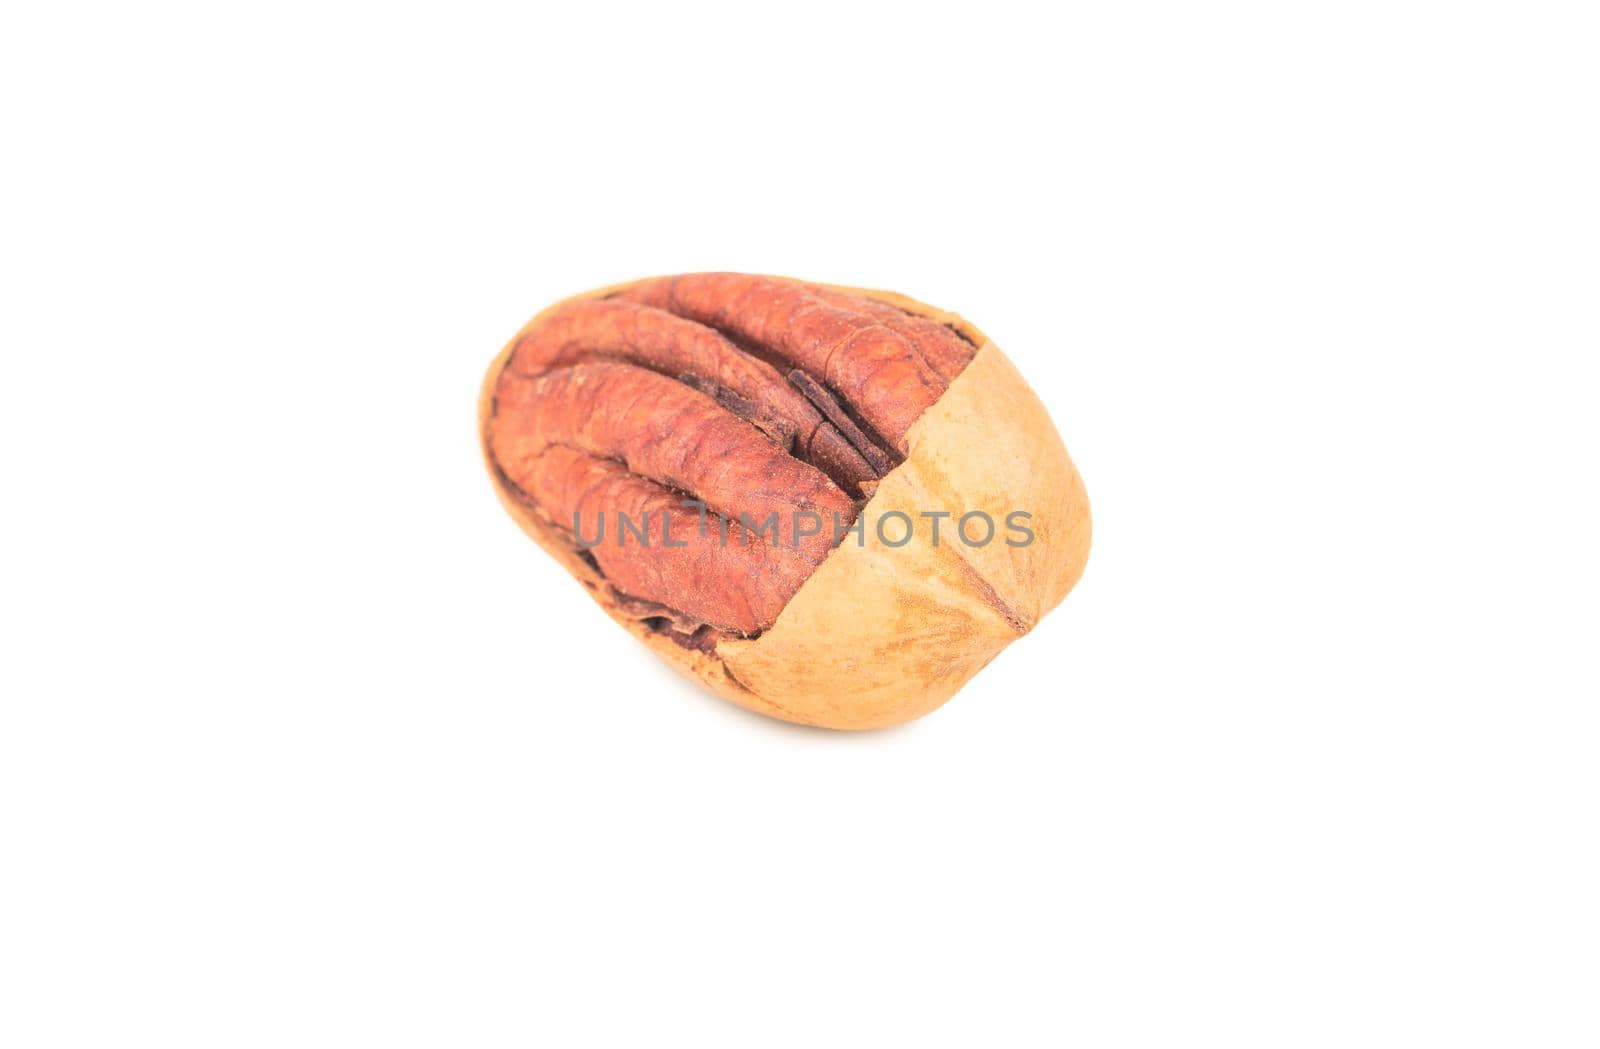 Pecan nut with broken shell isolated on white background